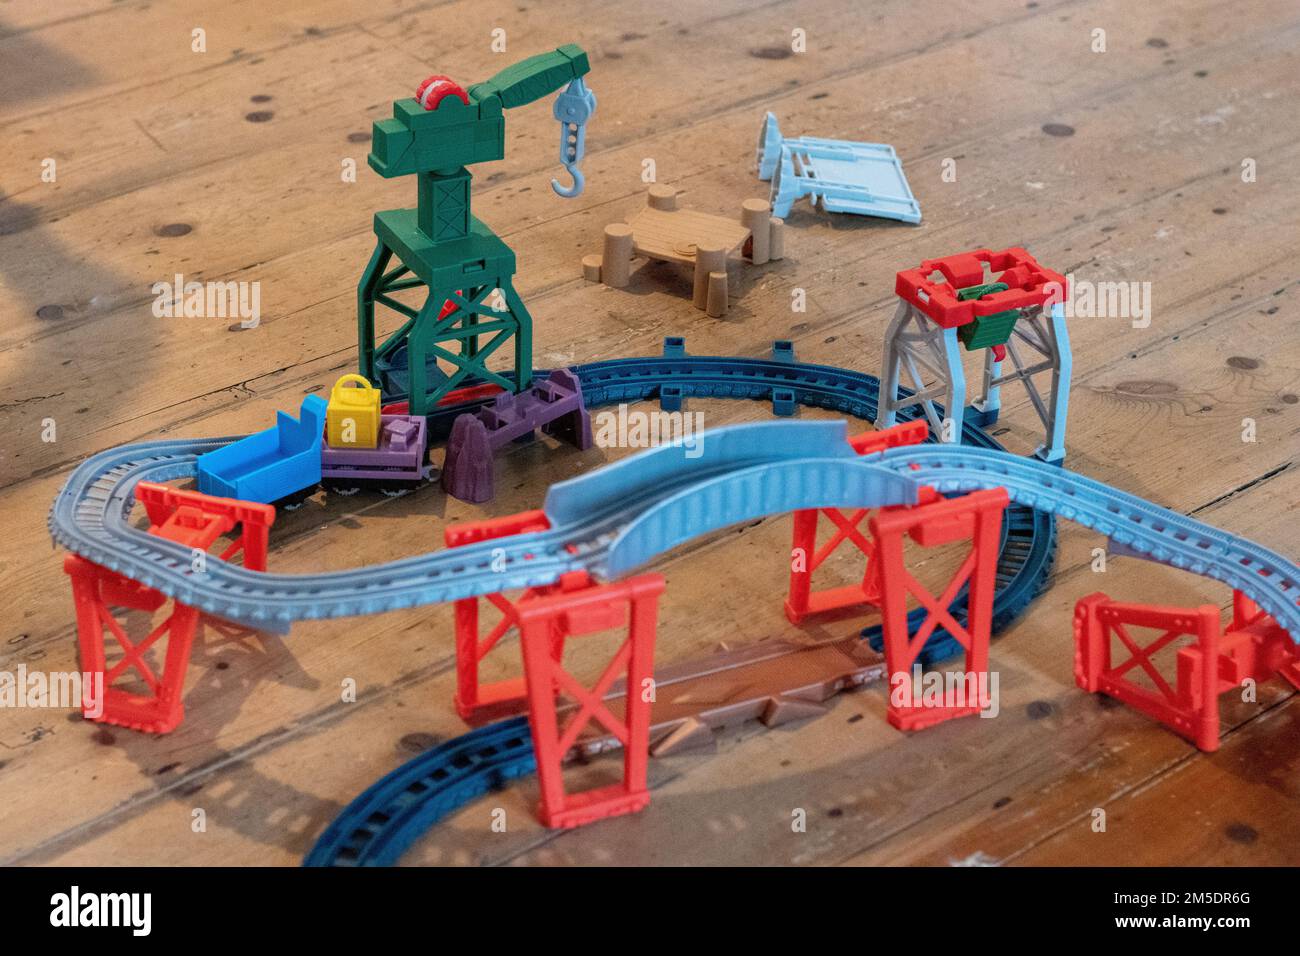 Thomas the Tank Engine plastic toy rail track train track with crane visible Stock Photo